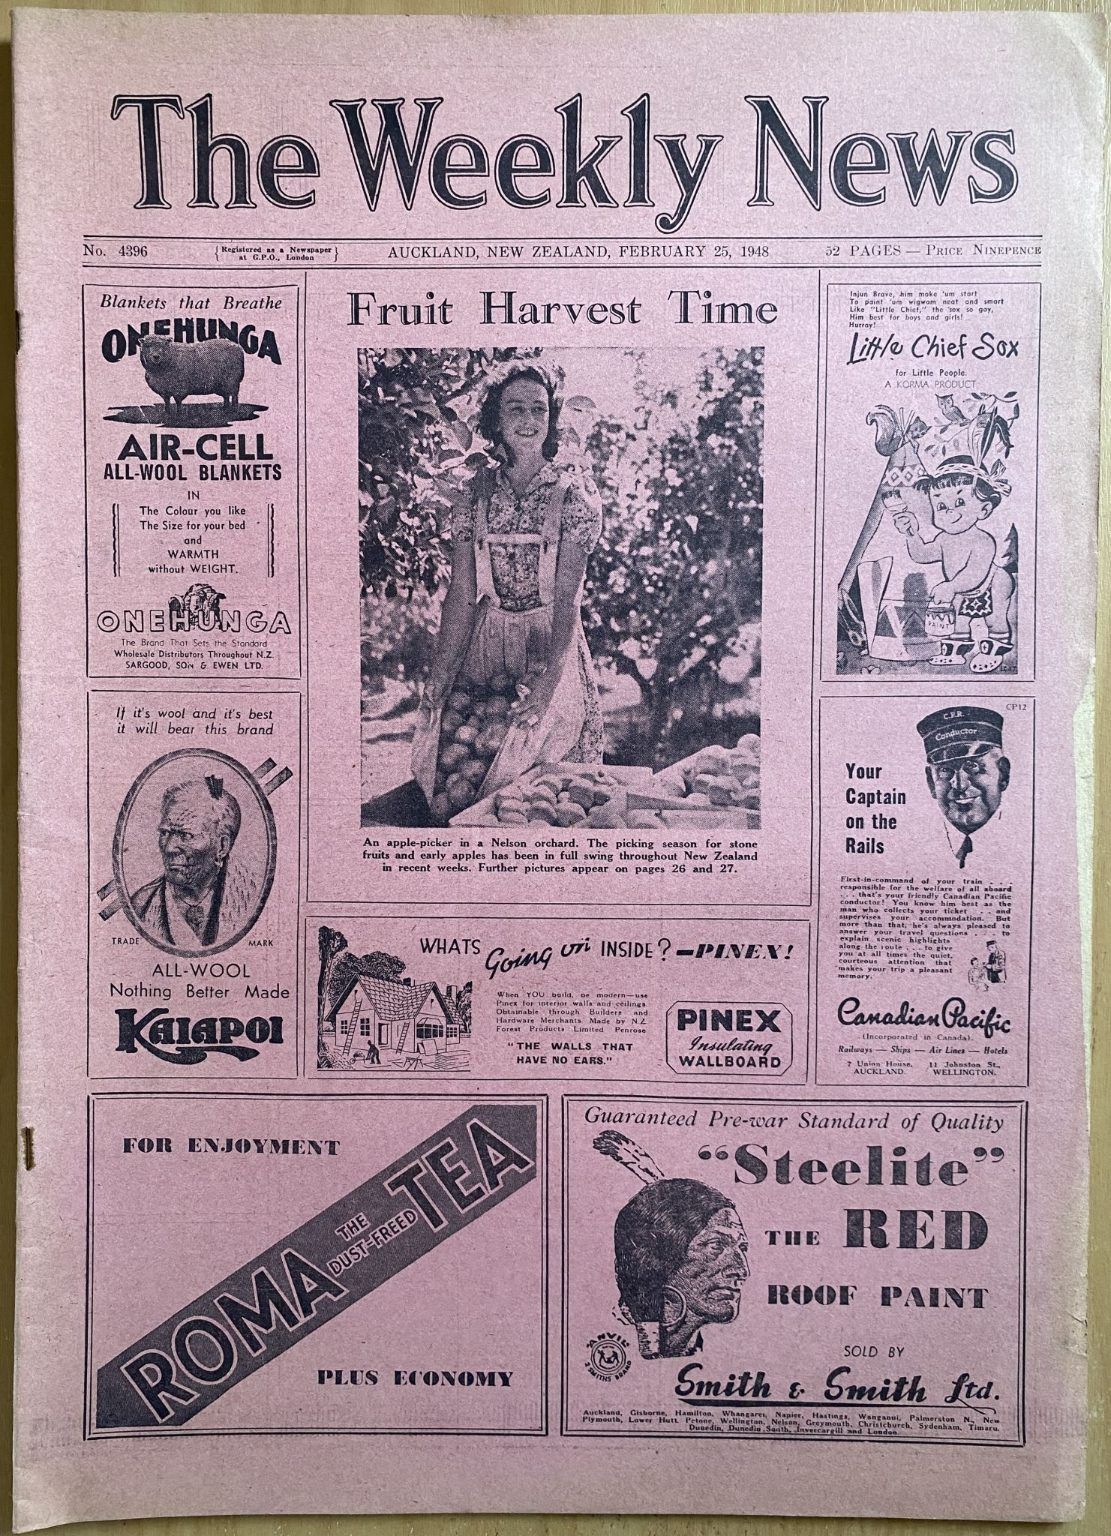 OLD NEWSPAPER: The Weekly News - No. 4396, 25 February 1948